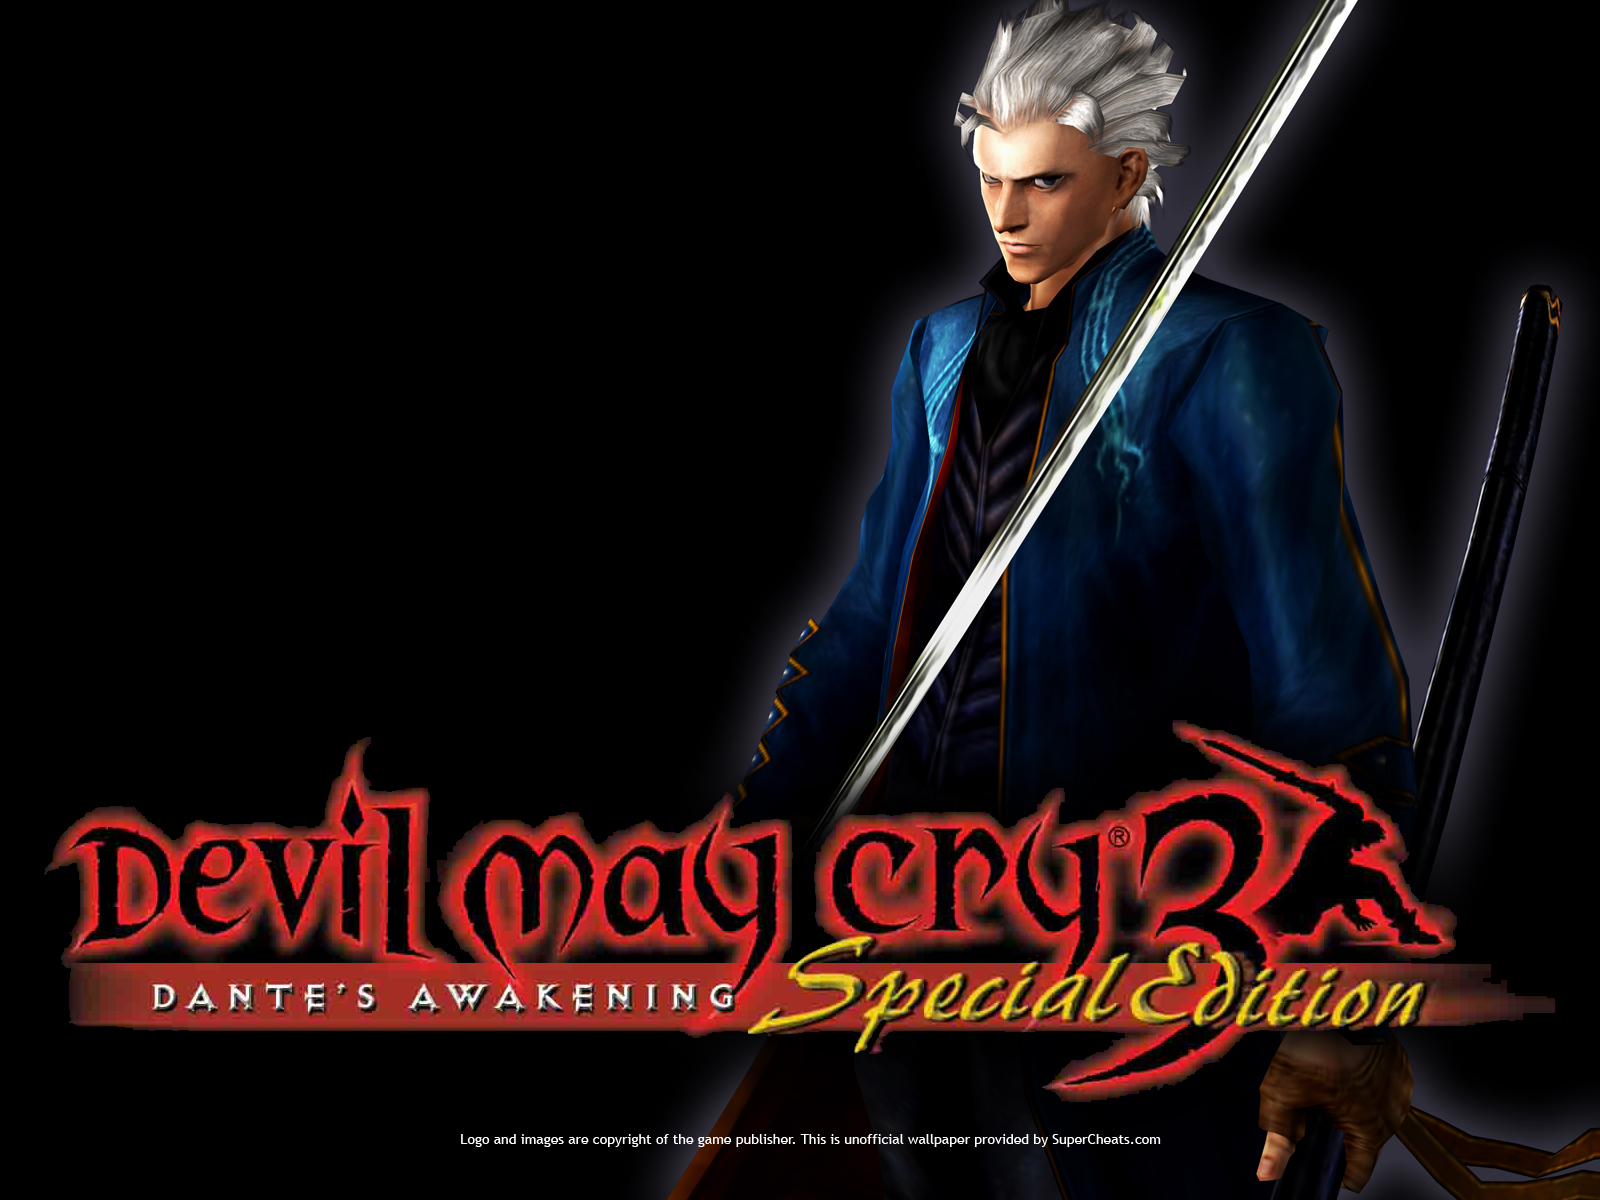 Devil+may+cry+3+pc+download+free